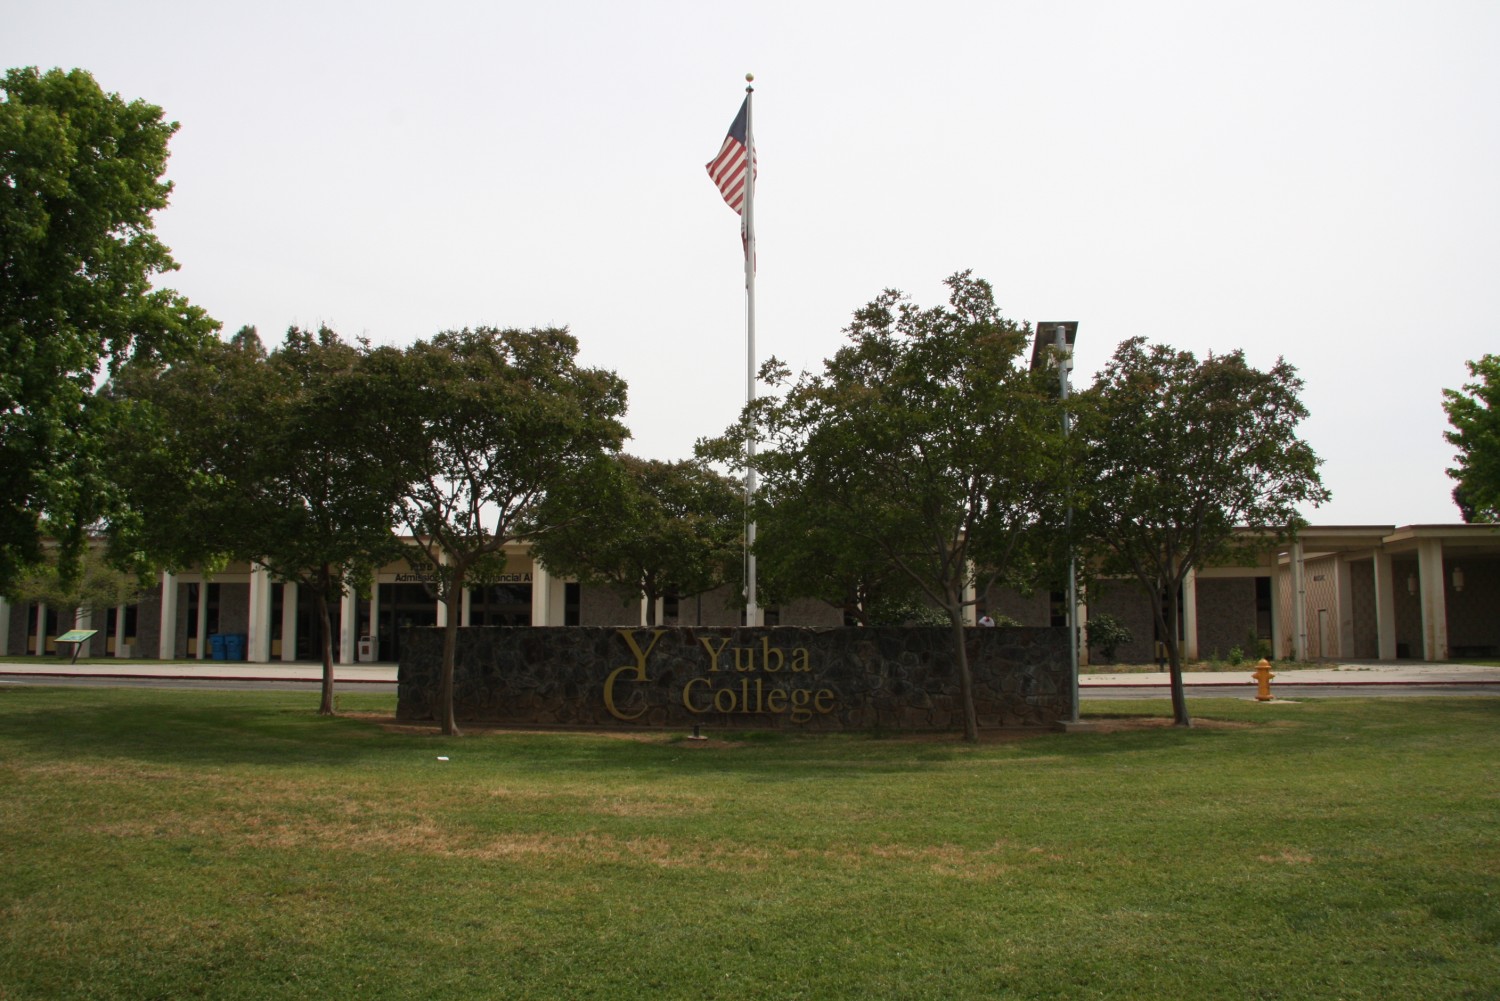 Yuba College sign located in front of administrative building